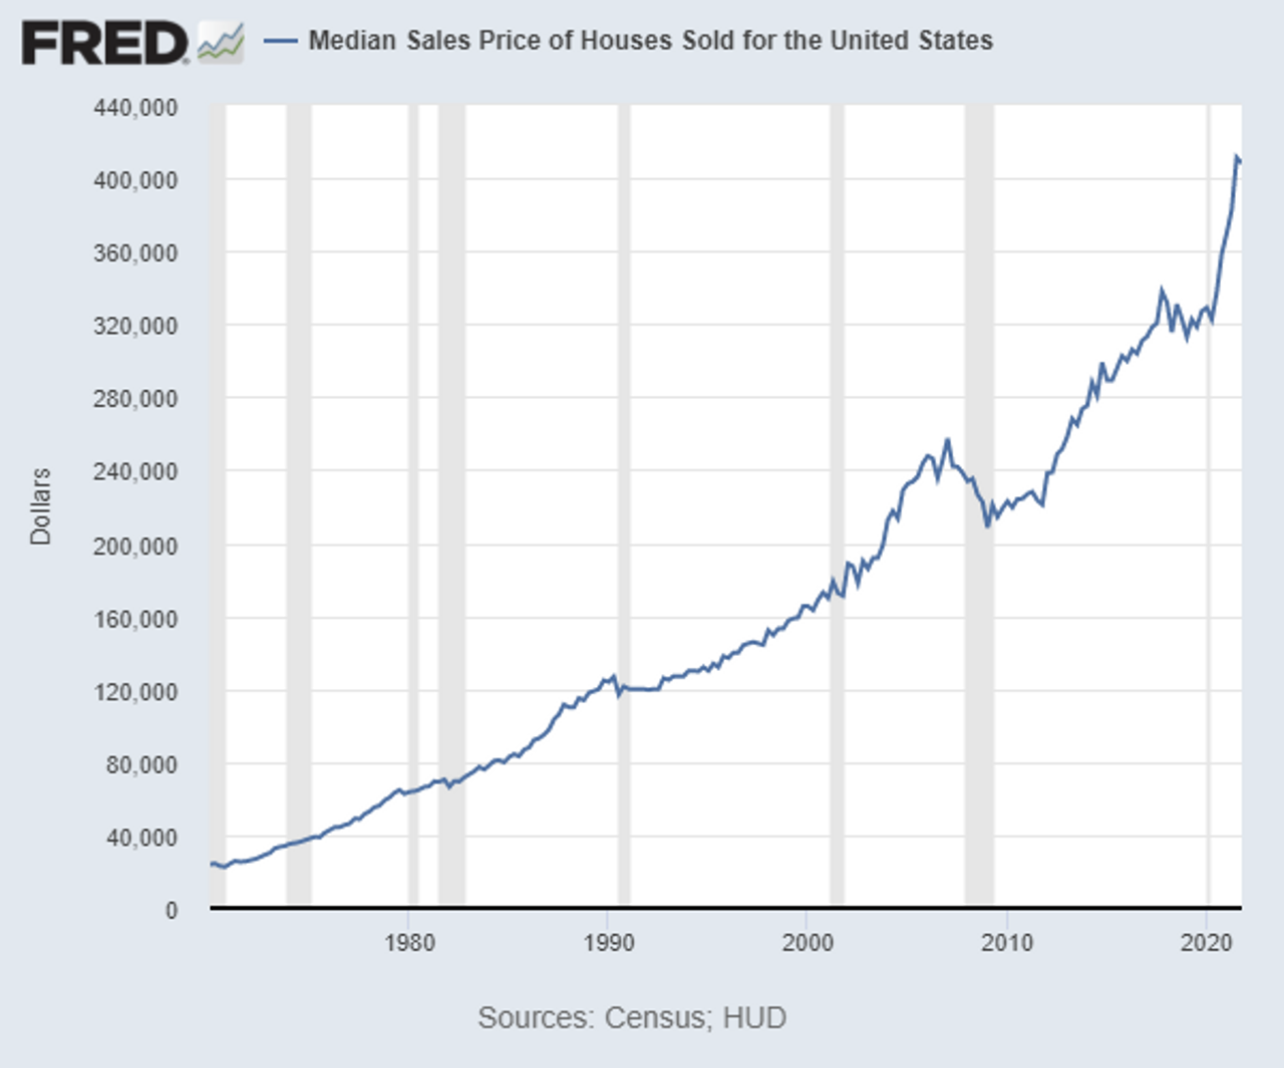 Median Home Prices Over 40 Years